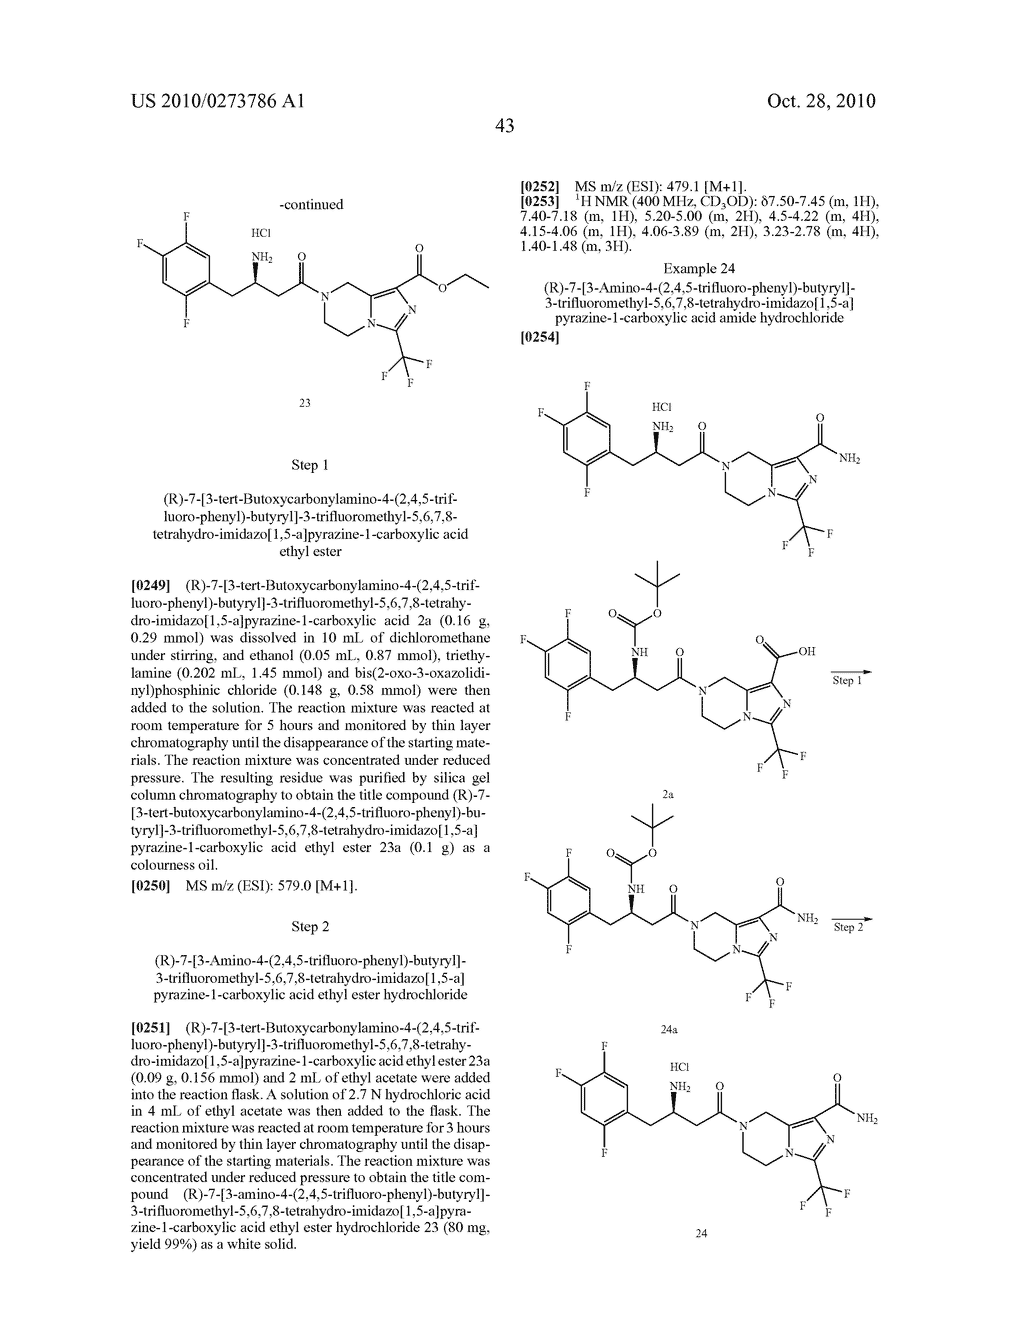 TETRAHYDRO-IMIDAZ0[1,5-A]PYRAZINE DERIVATIVES, PREPARATION PROCESS AND MEDICINAL USE THEREOF - diagram, schematic, and image 44